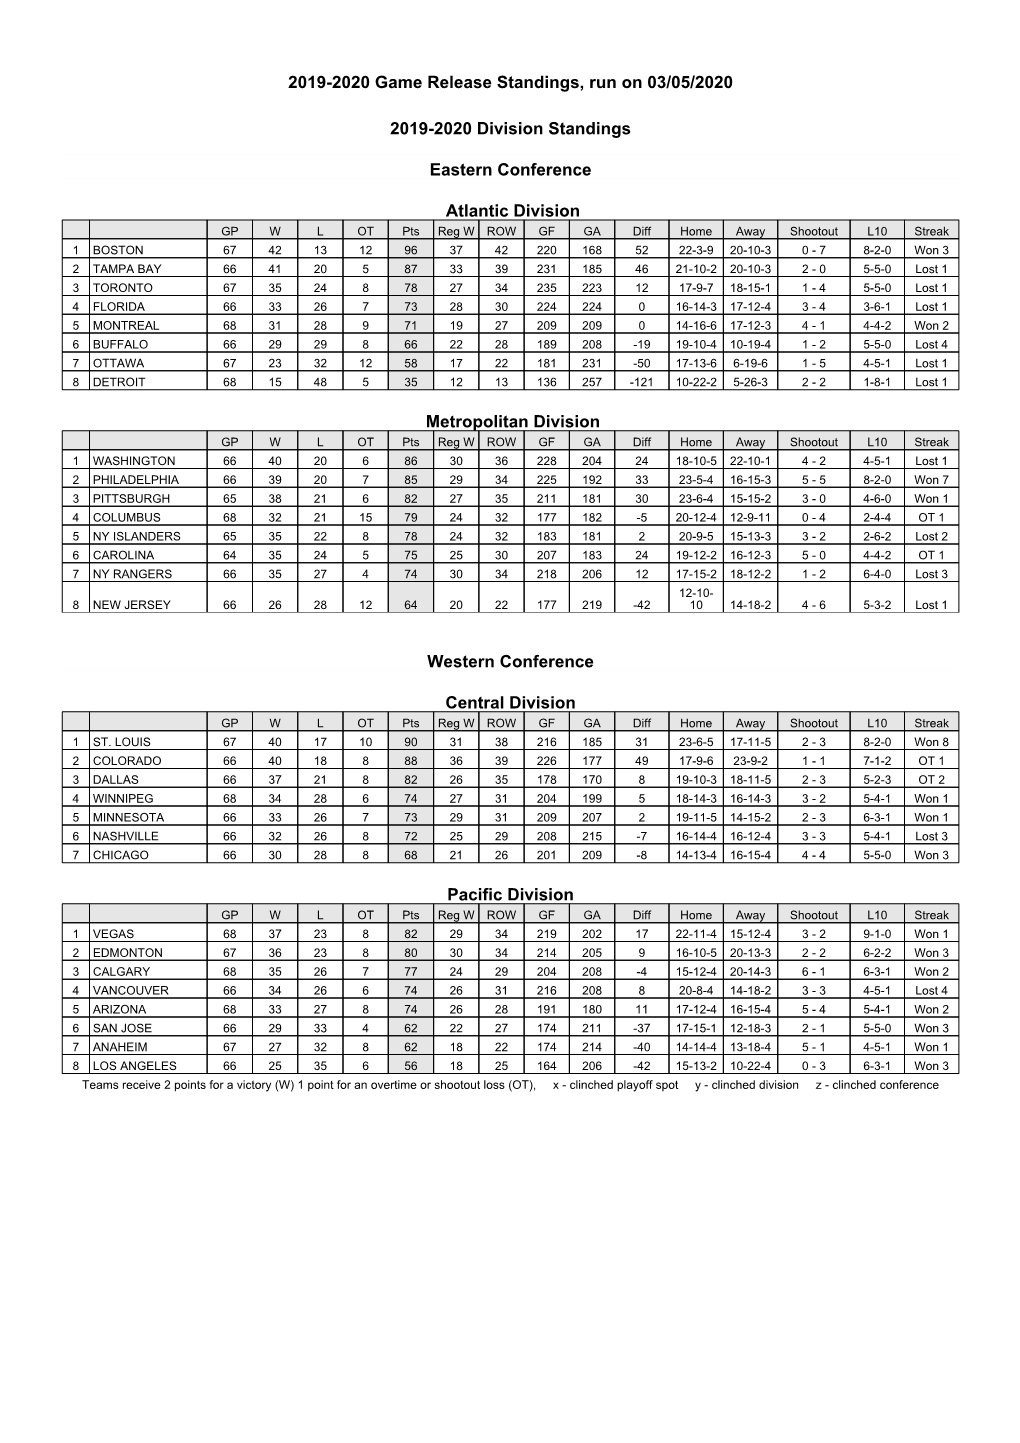 2019-2020 Game Release Standings, Run on 03/05/2020 2019-2020 Division Standings Eastern Conference Atlantic Division Metropolit